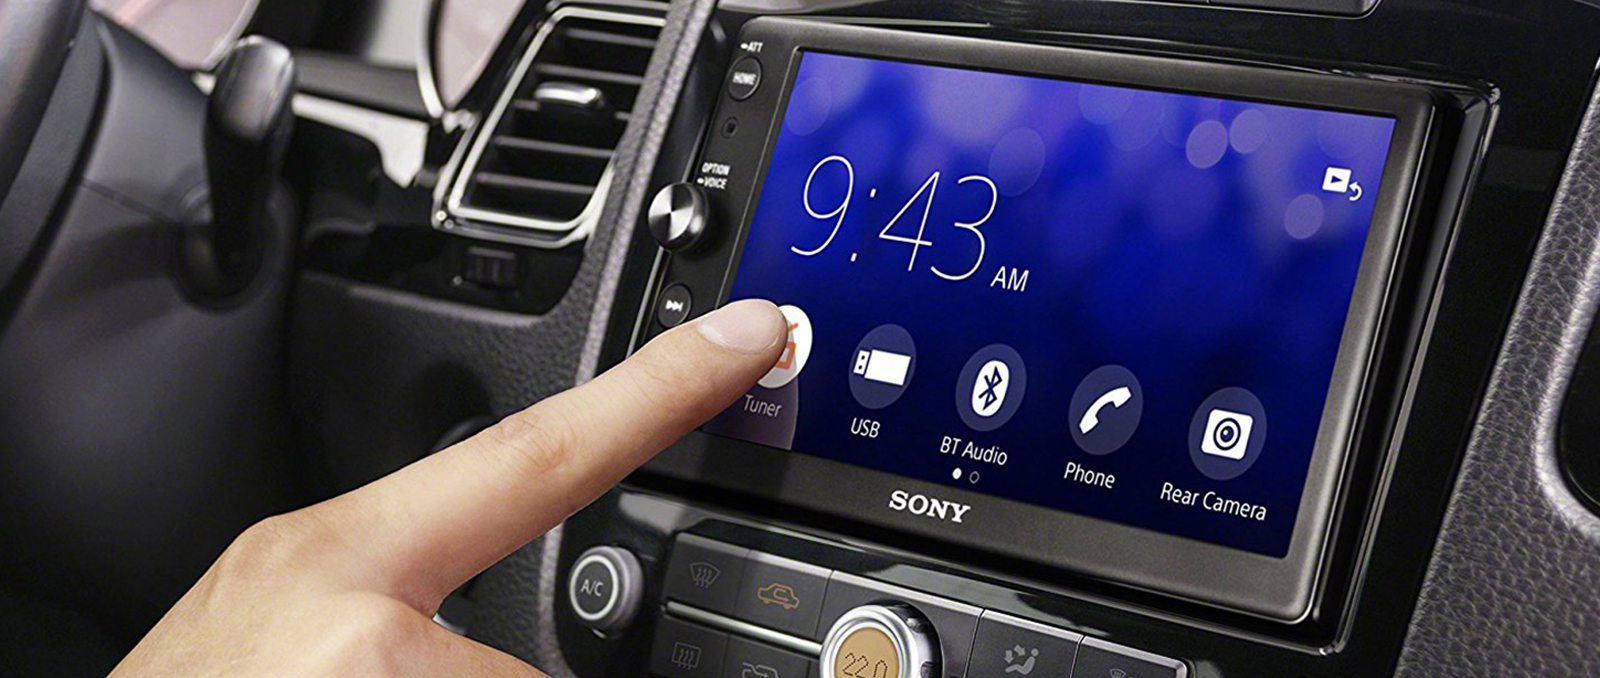 Need a stereo installed? Or any other car electronics? Check out our electronics installation!